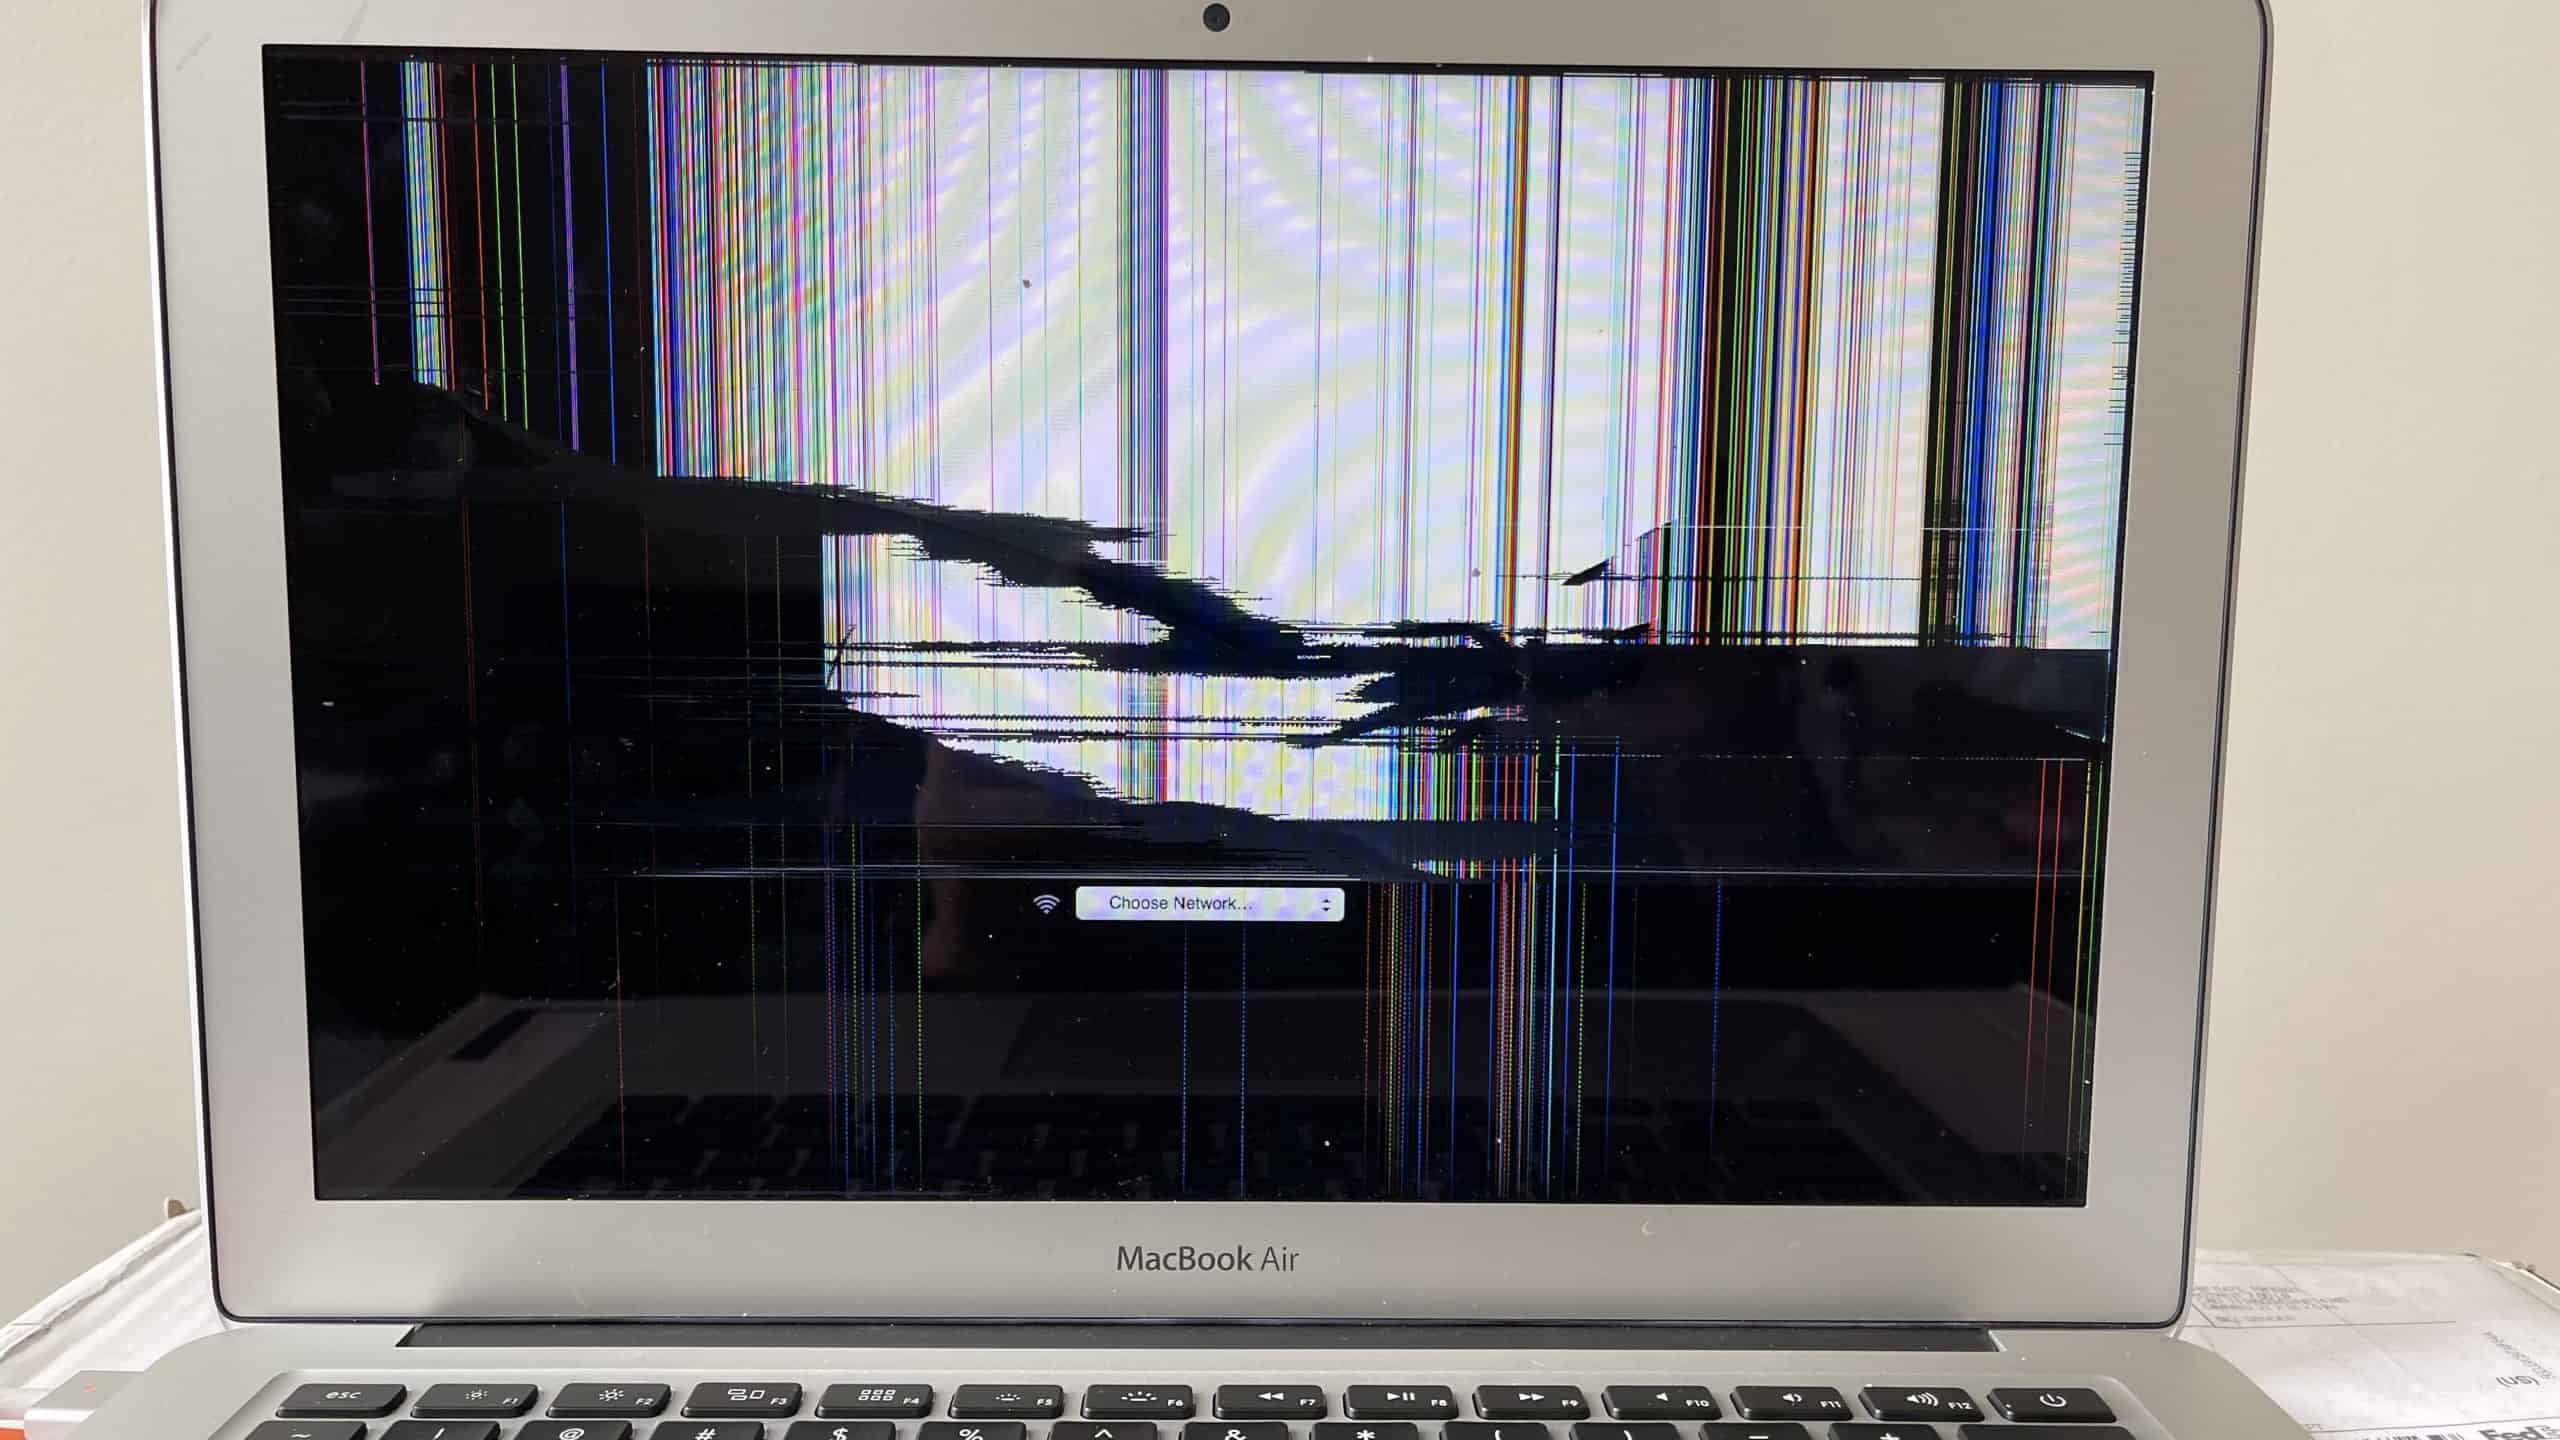 MacBook Air with Cracked LCD panel scaled